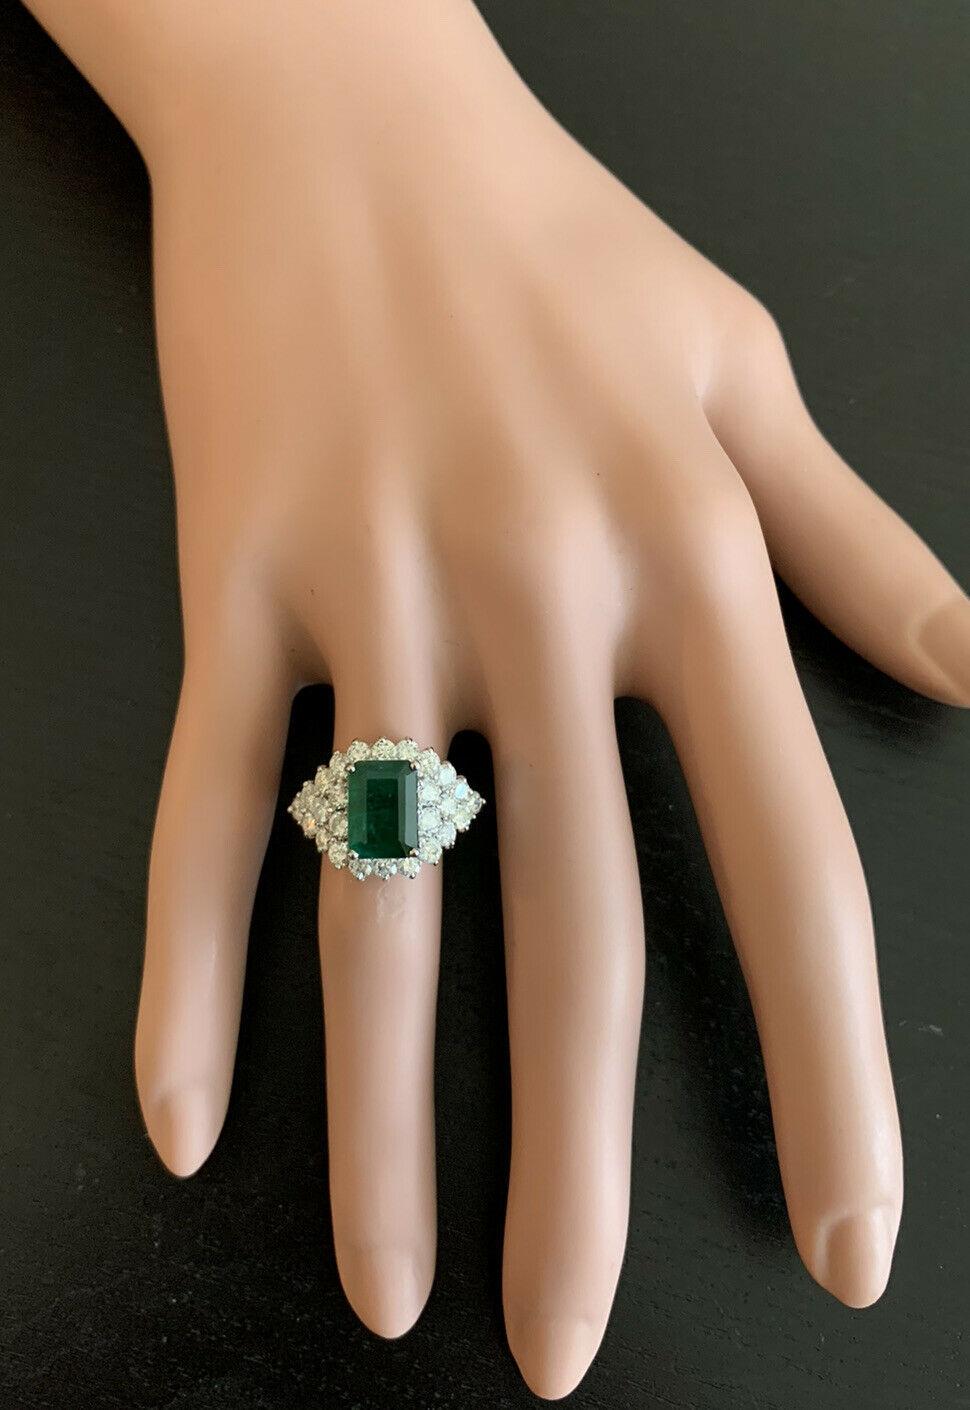 4.70 Carat Natural Emerald and Diamond 14 Karat Solid White Gold Ring For Sale 1